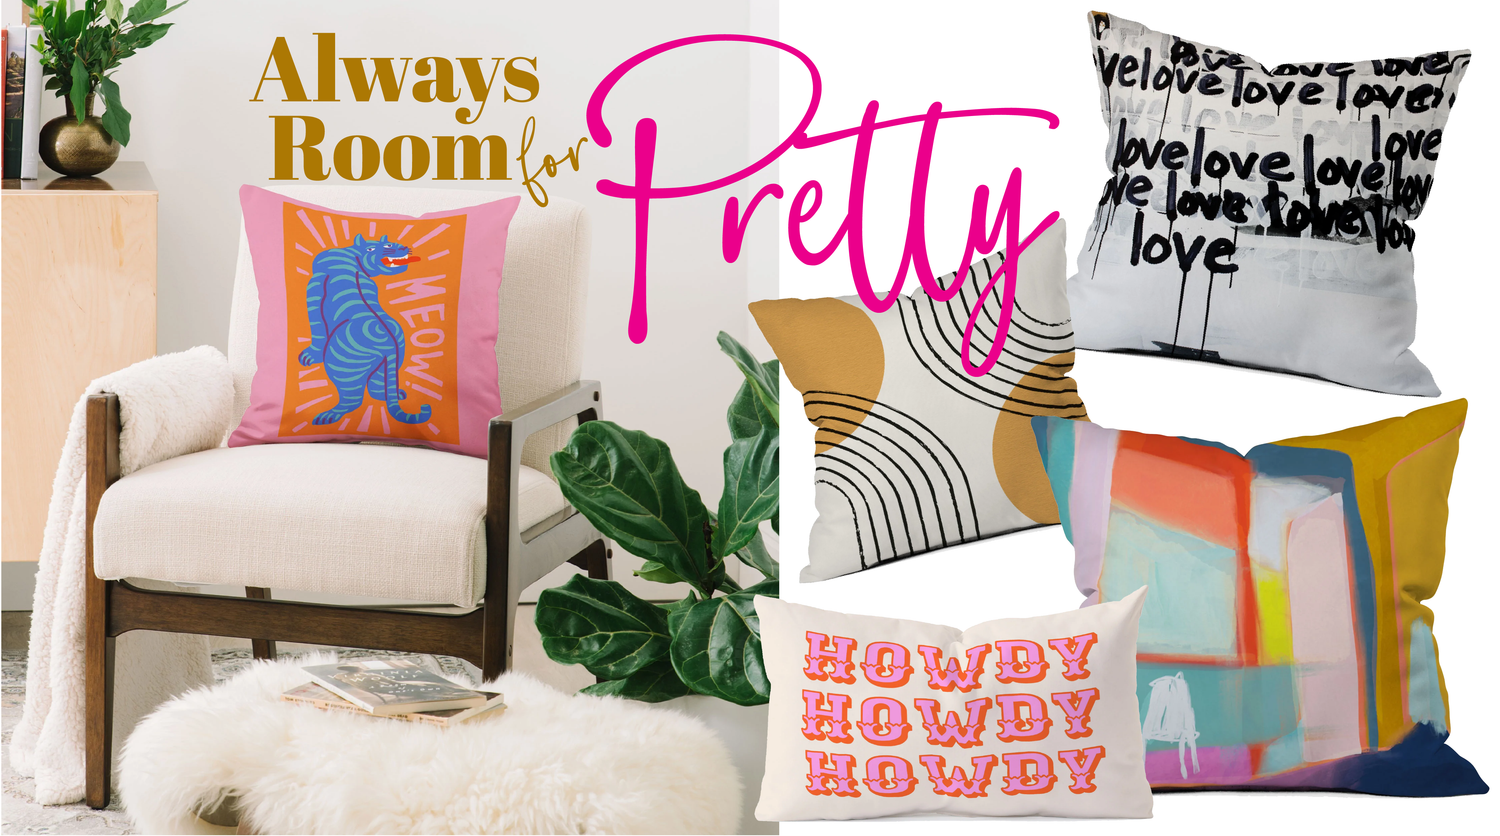 Always Room for Pretty - Decor refresh for the new year